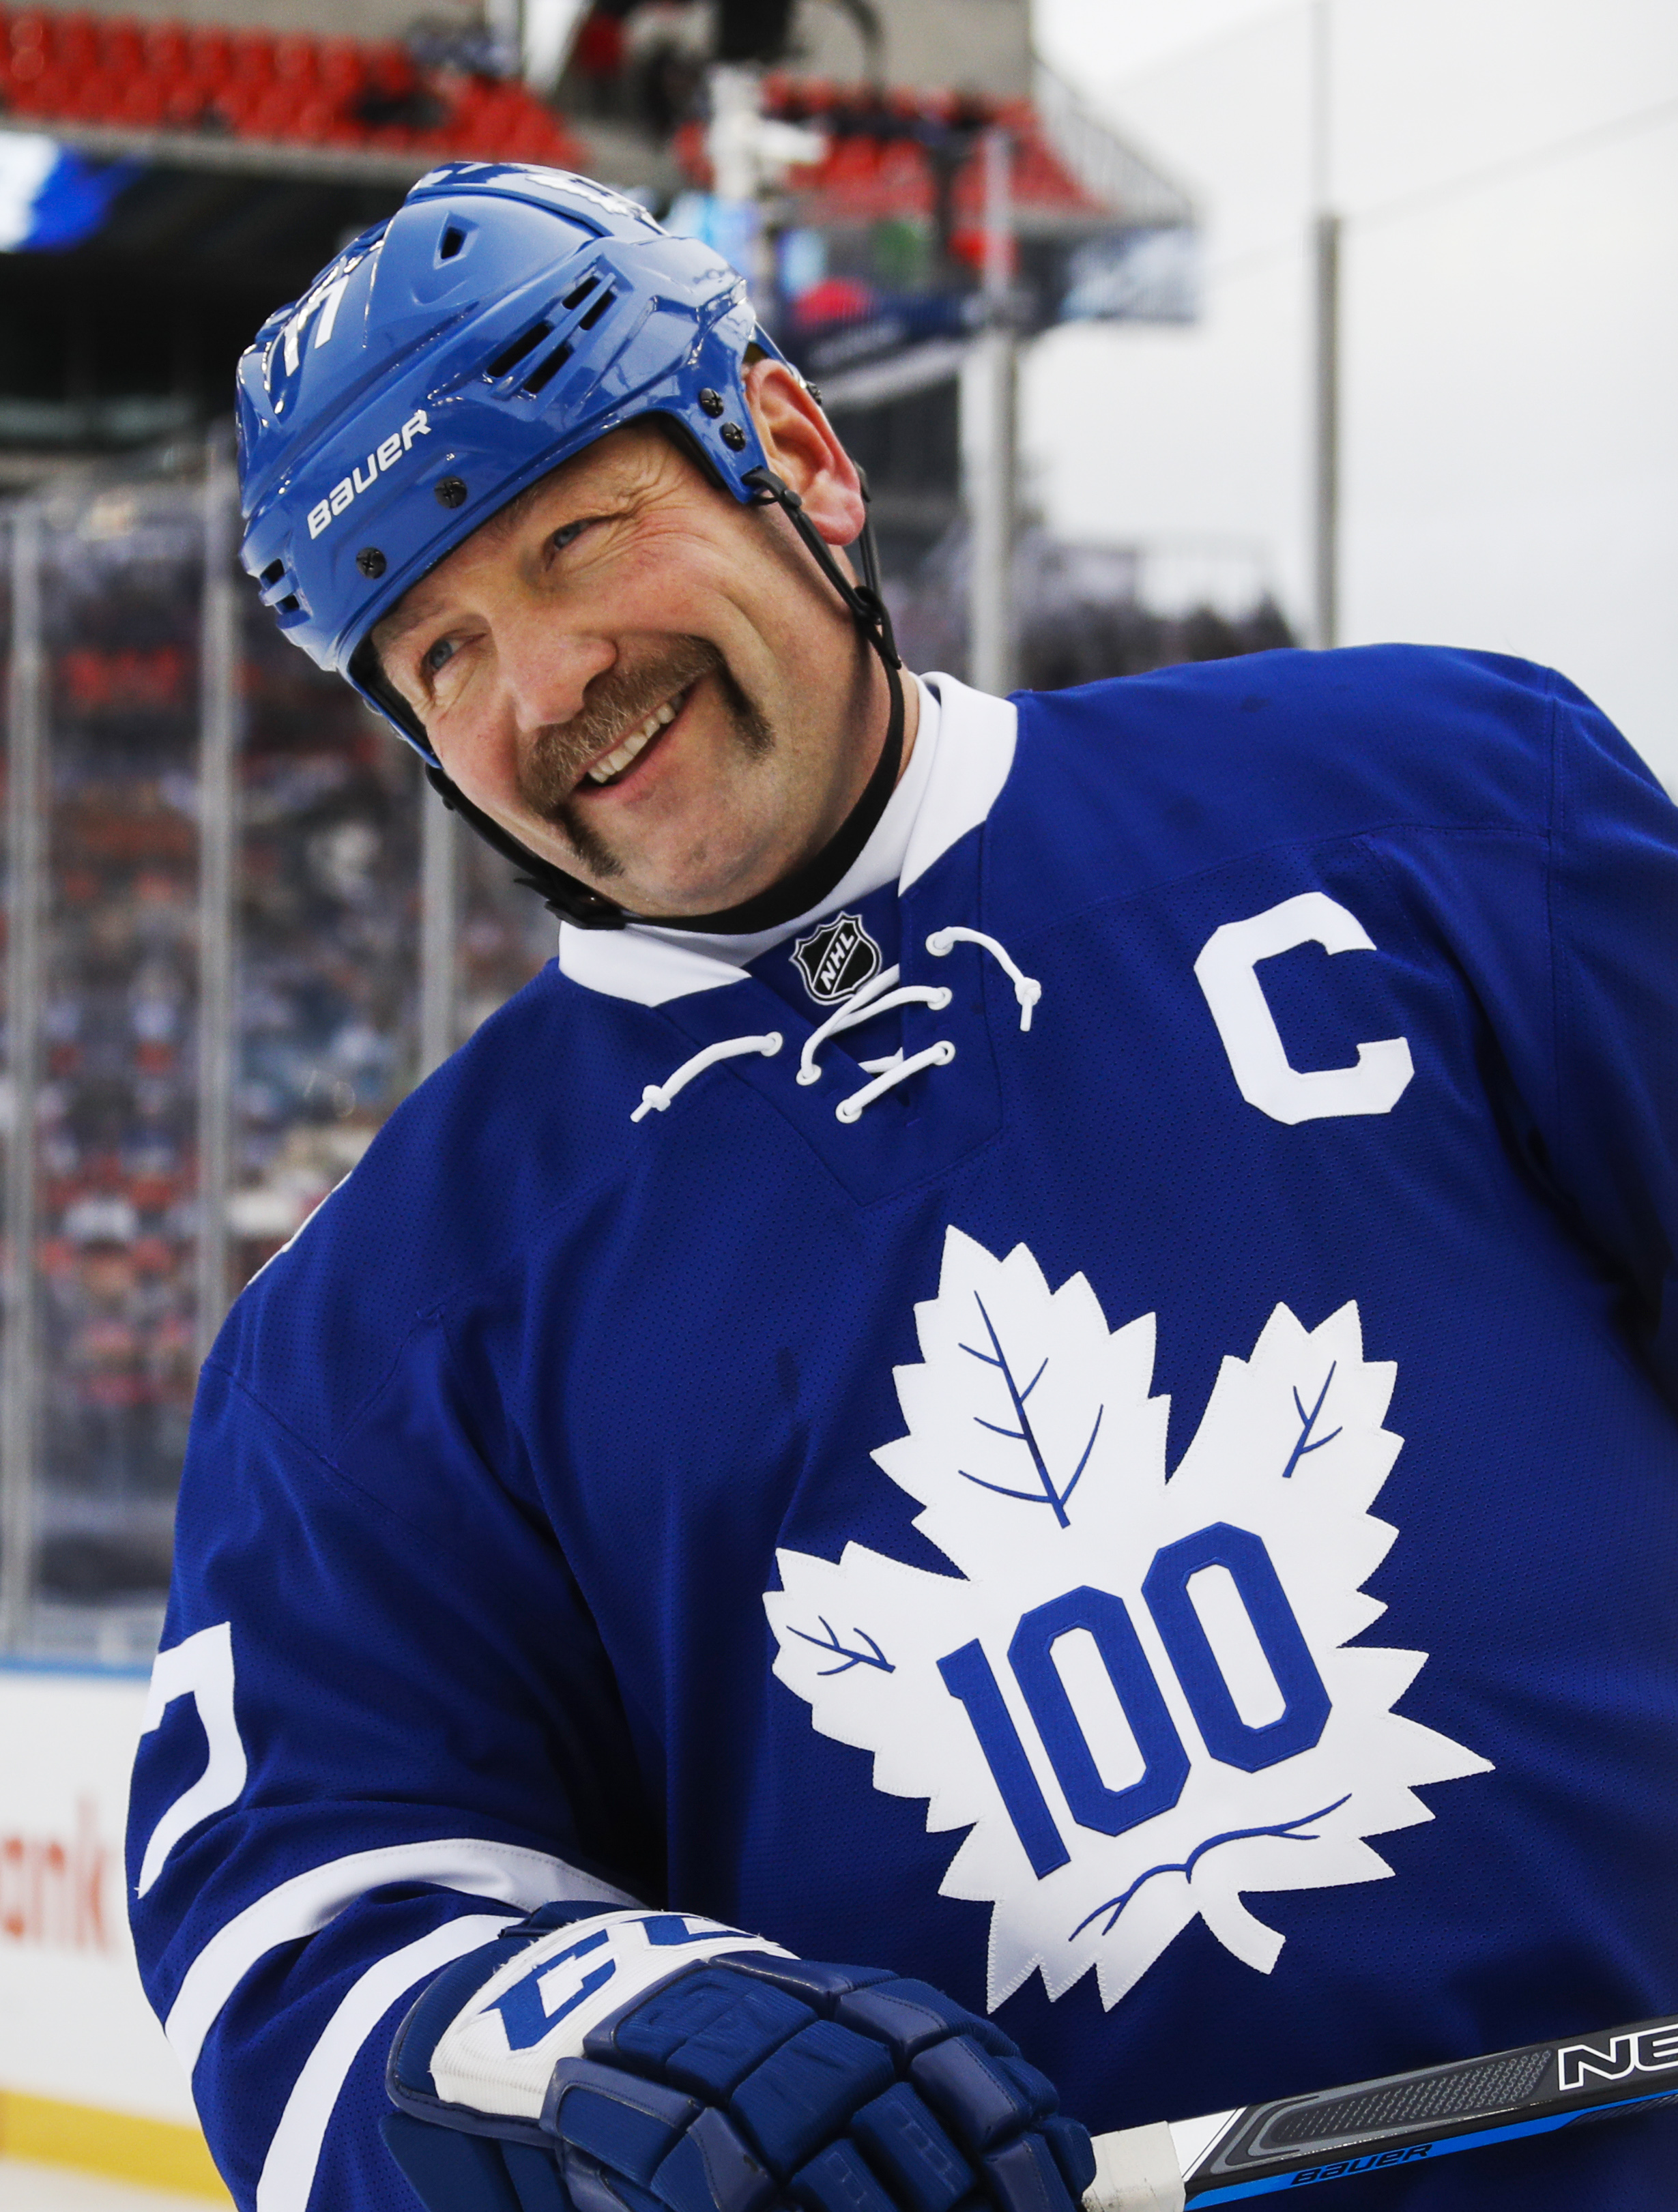 Does NHL hockey fan favourite Wendel Clark deserve to be among Leaf greats?